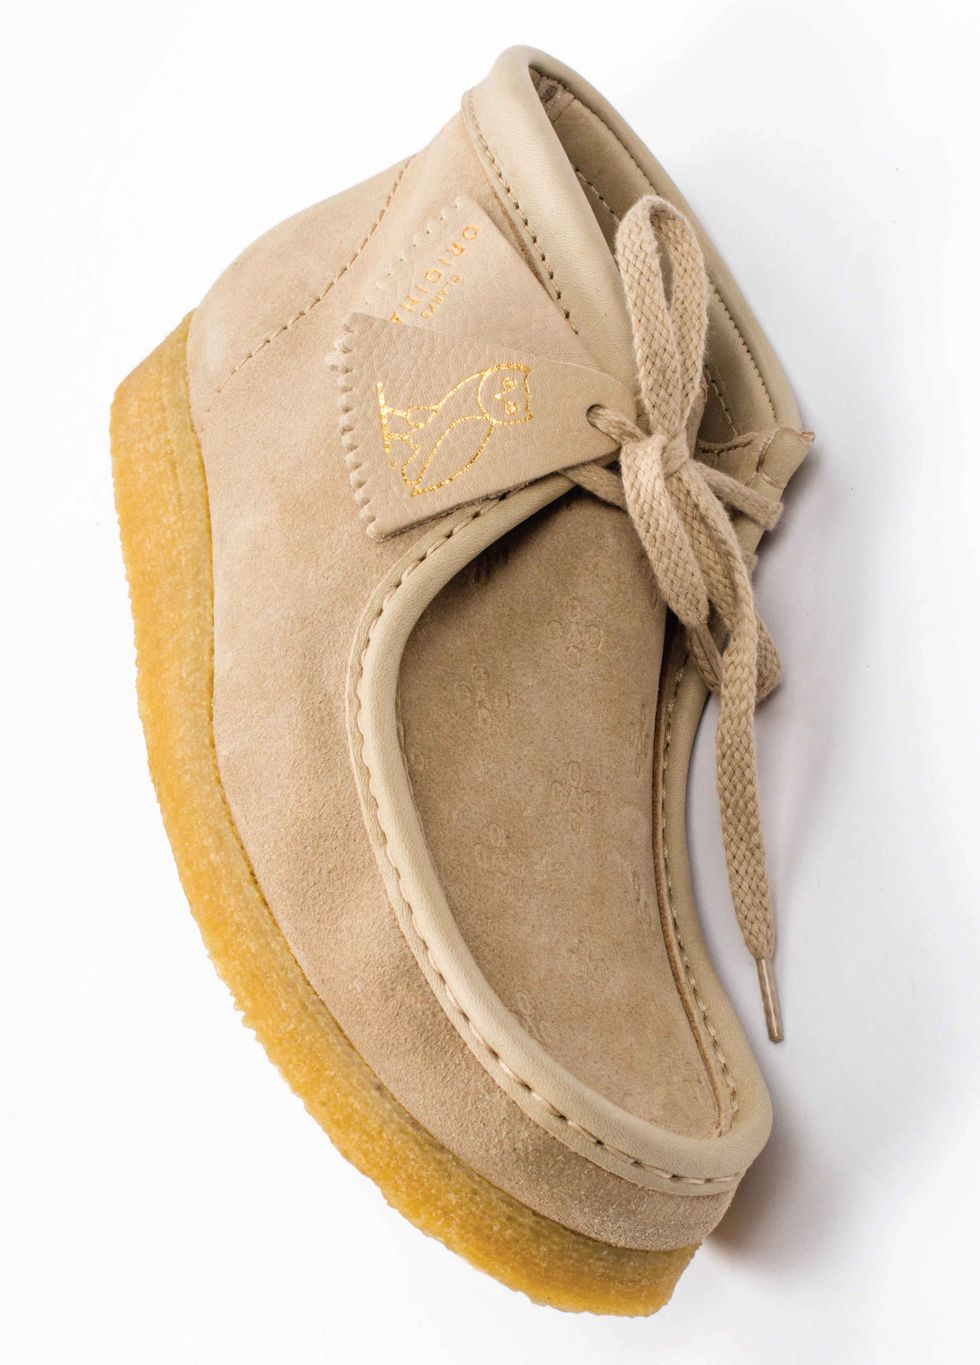 OVO Made Limited-Edition Clarks Originals Wallabees